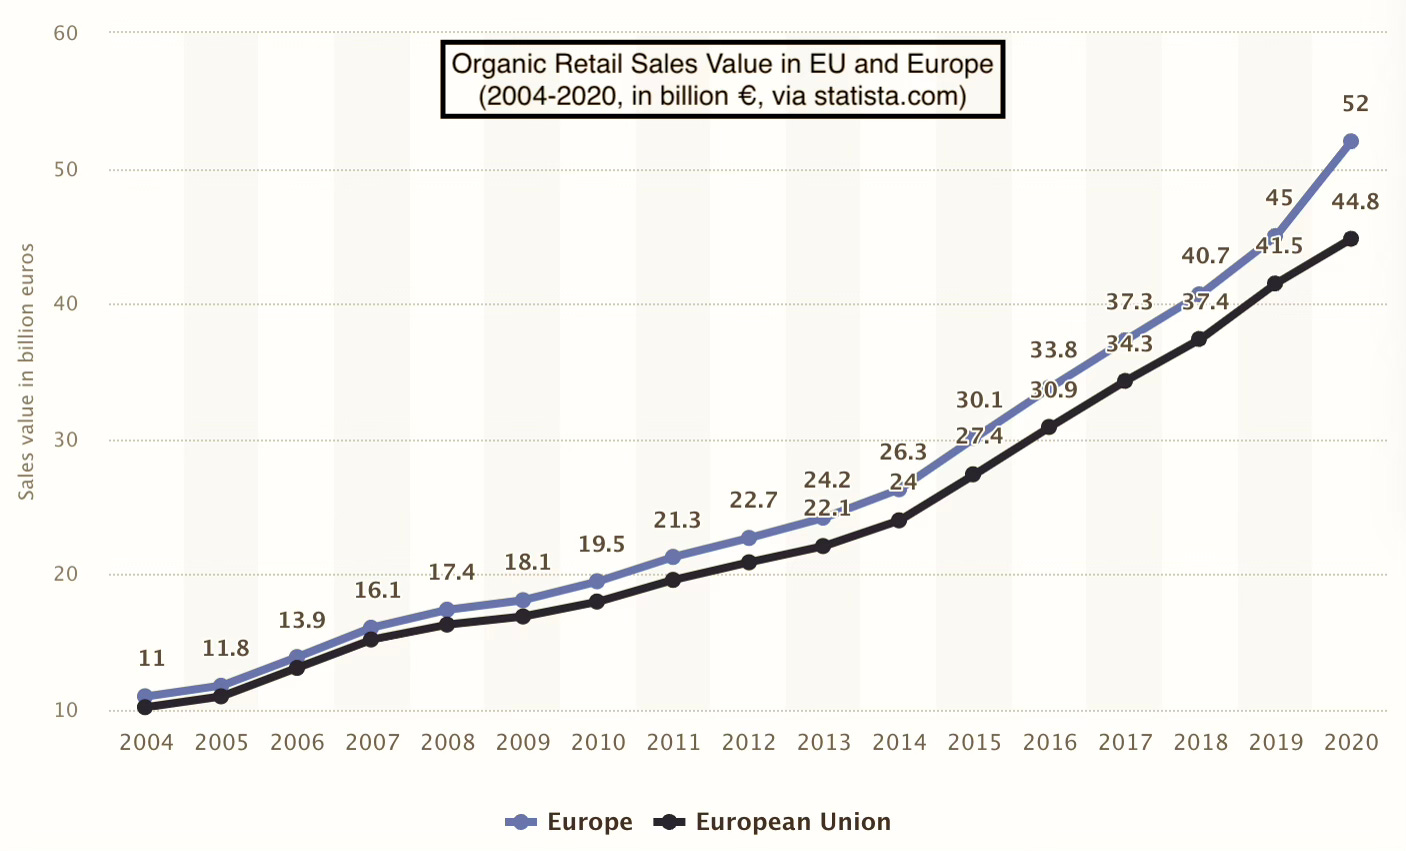 Organic retail sales value in EU and Europe (2004-2020, in billion Euro)